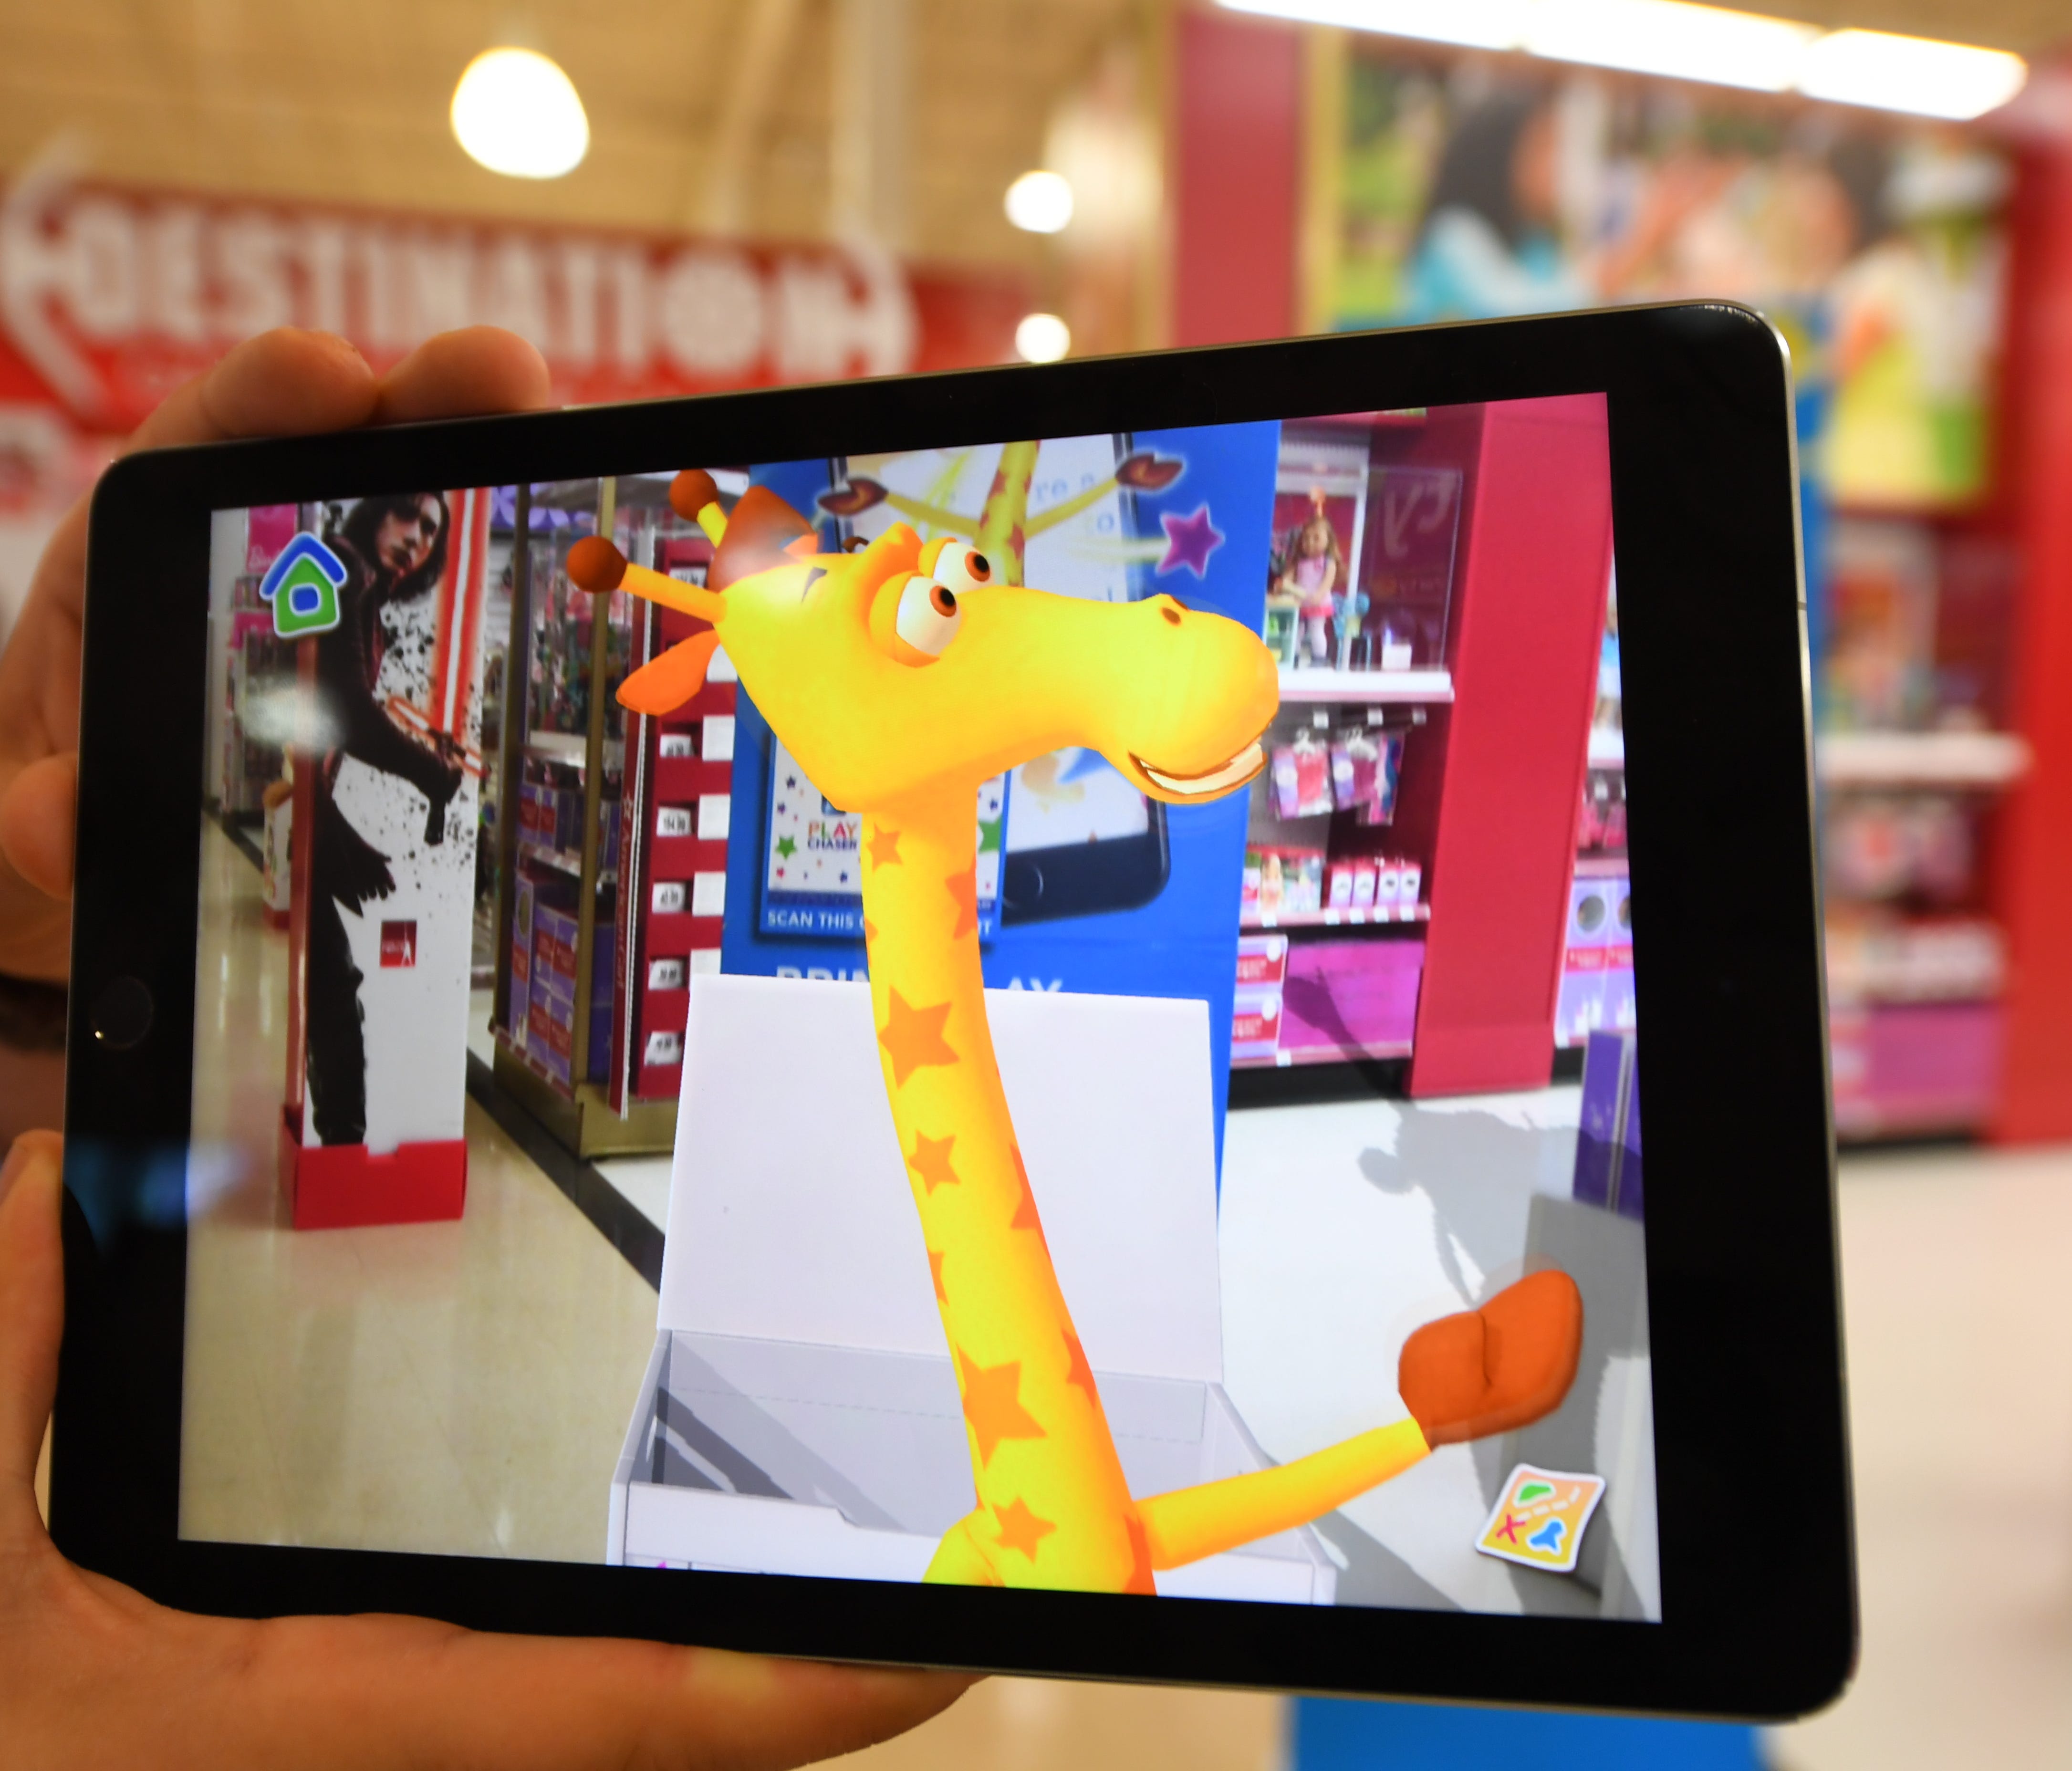 9/25/17 8:29:17 AM -- Totowa , NJ  --    PHOTOS EMBARGOED UNTIL 12:01am MONDAY 10/2/2017!!!       An exclusive peek at the toy store's new augmented reality in-store experience  The experience will allow shoppers, through their mobile devices, to be guided